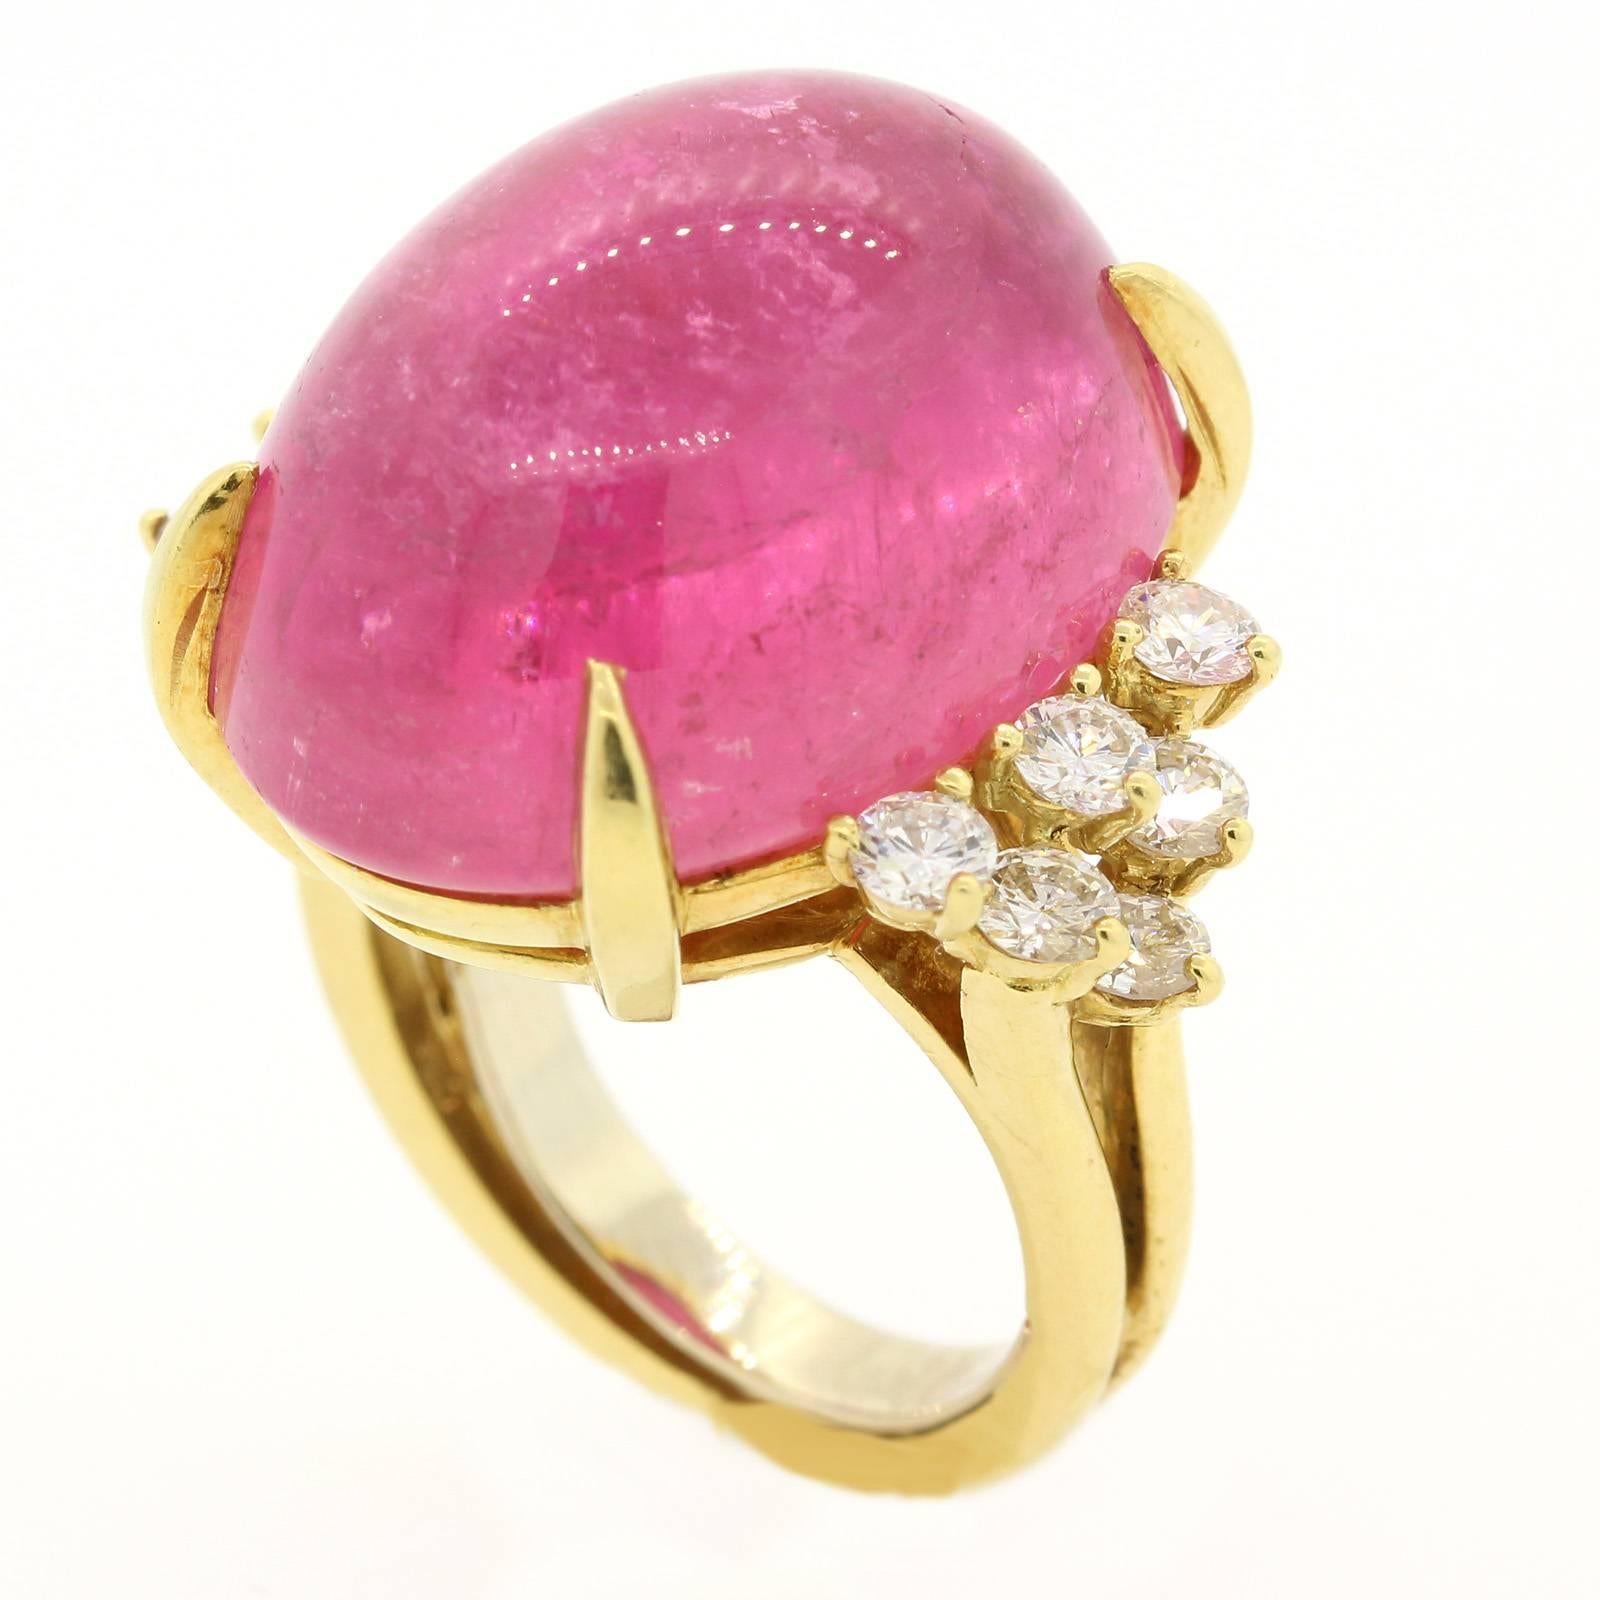 A Happy and Bright Cocktail Ring!  The 18KT yellow gold setting features a beautiful cabochon cut, 3.30 carats Pink Tourmaline, flanked by twelve Round Brilliant cut Diamonds weighing 0.75 carat.  The diamonds are of G/H color - VS clarity.  It is